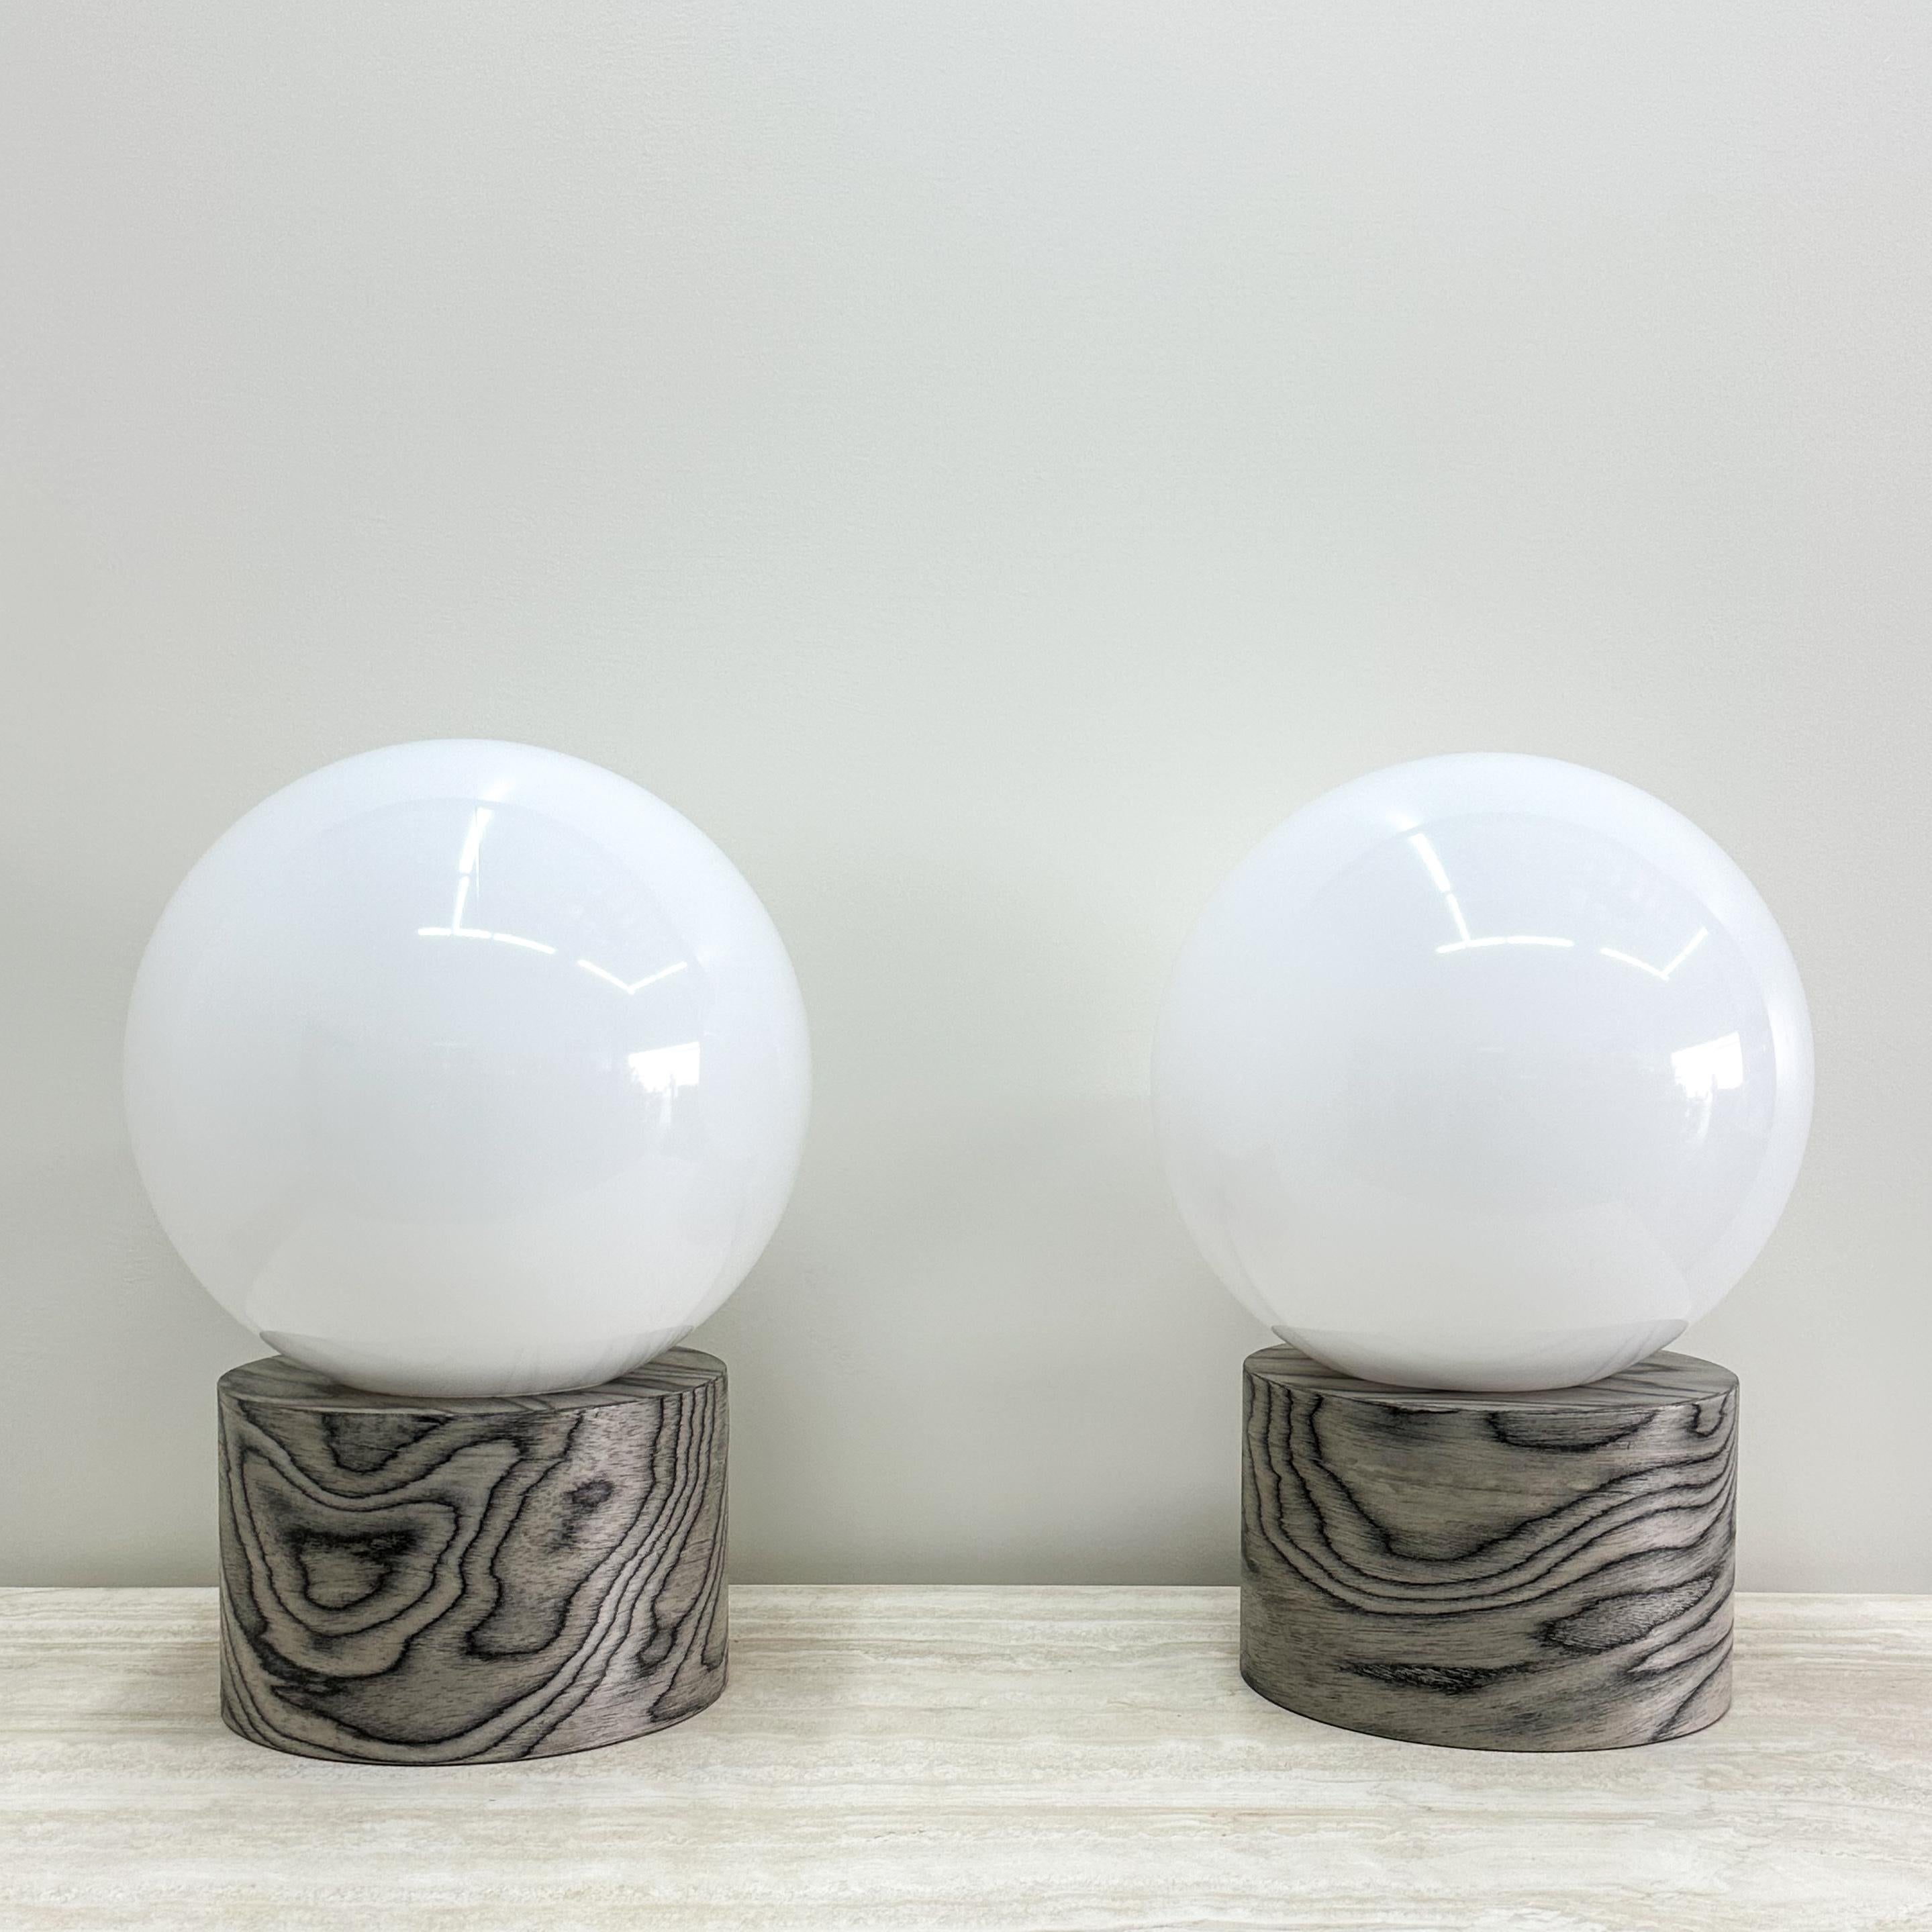 Pair of Ettore Sottsass Veneer & Acrylic Globe Lamps.

The lamps are newly made and have been veneered with the original ALPI veneer, designed by Ettore Sottsass. The veneer has been sealed with a satin finish to enhance durability. The lamps are a